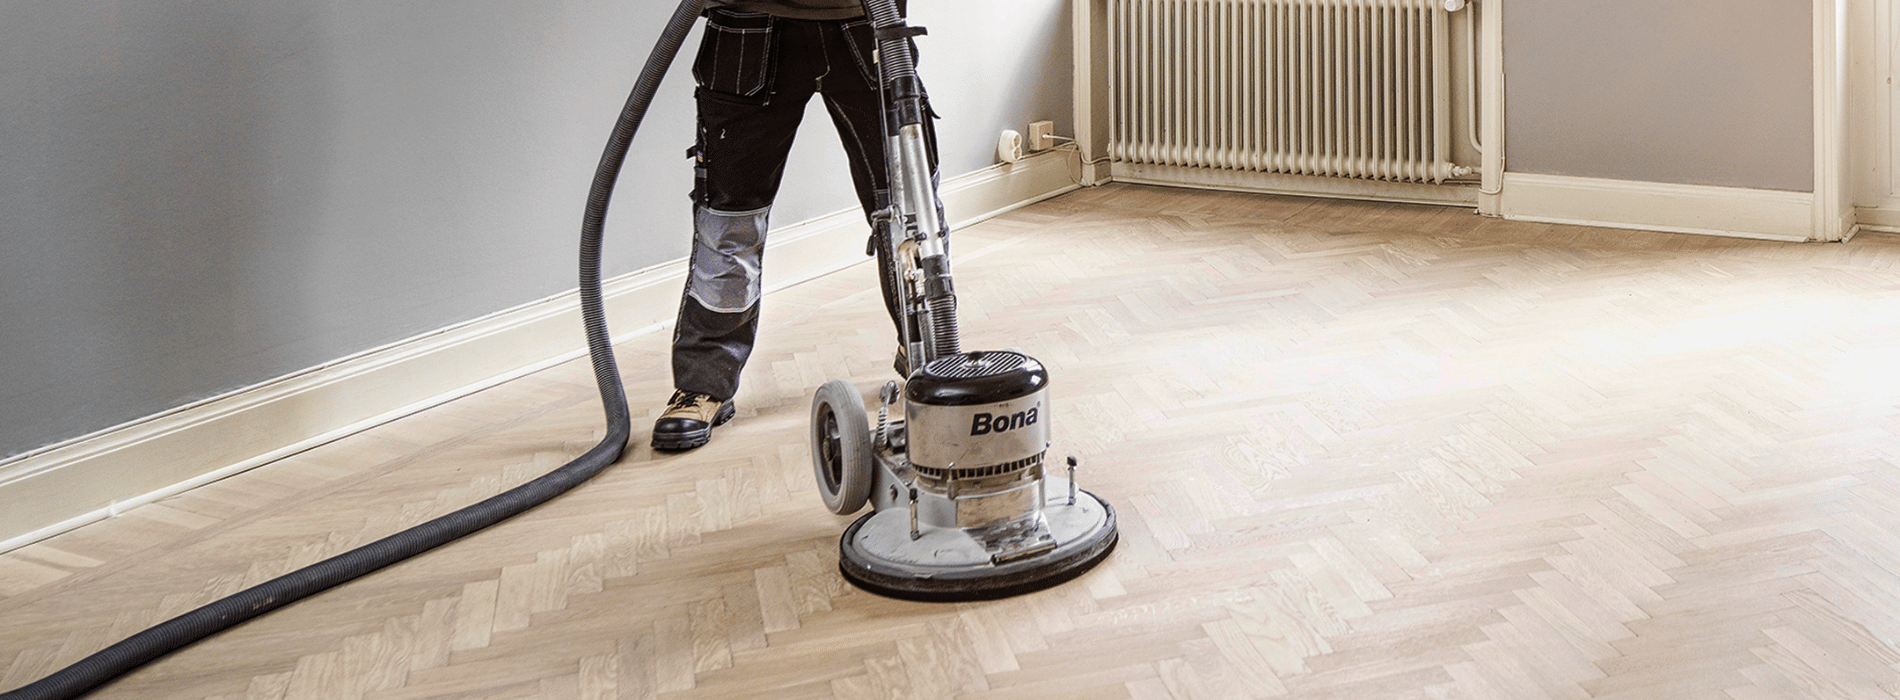 In North Kingston, KT2, Mr Sander® use a Bona FlexiSand 1.9, a powerful and efficient buffer sander with Ø 407 mm dimension, 1.9 kW effect, and 230 V voltage. The sander is connected to a dust extraction system with a HEPA filter for clean and effective results while sanding parquet floors.